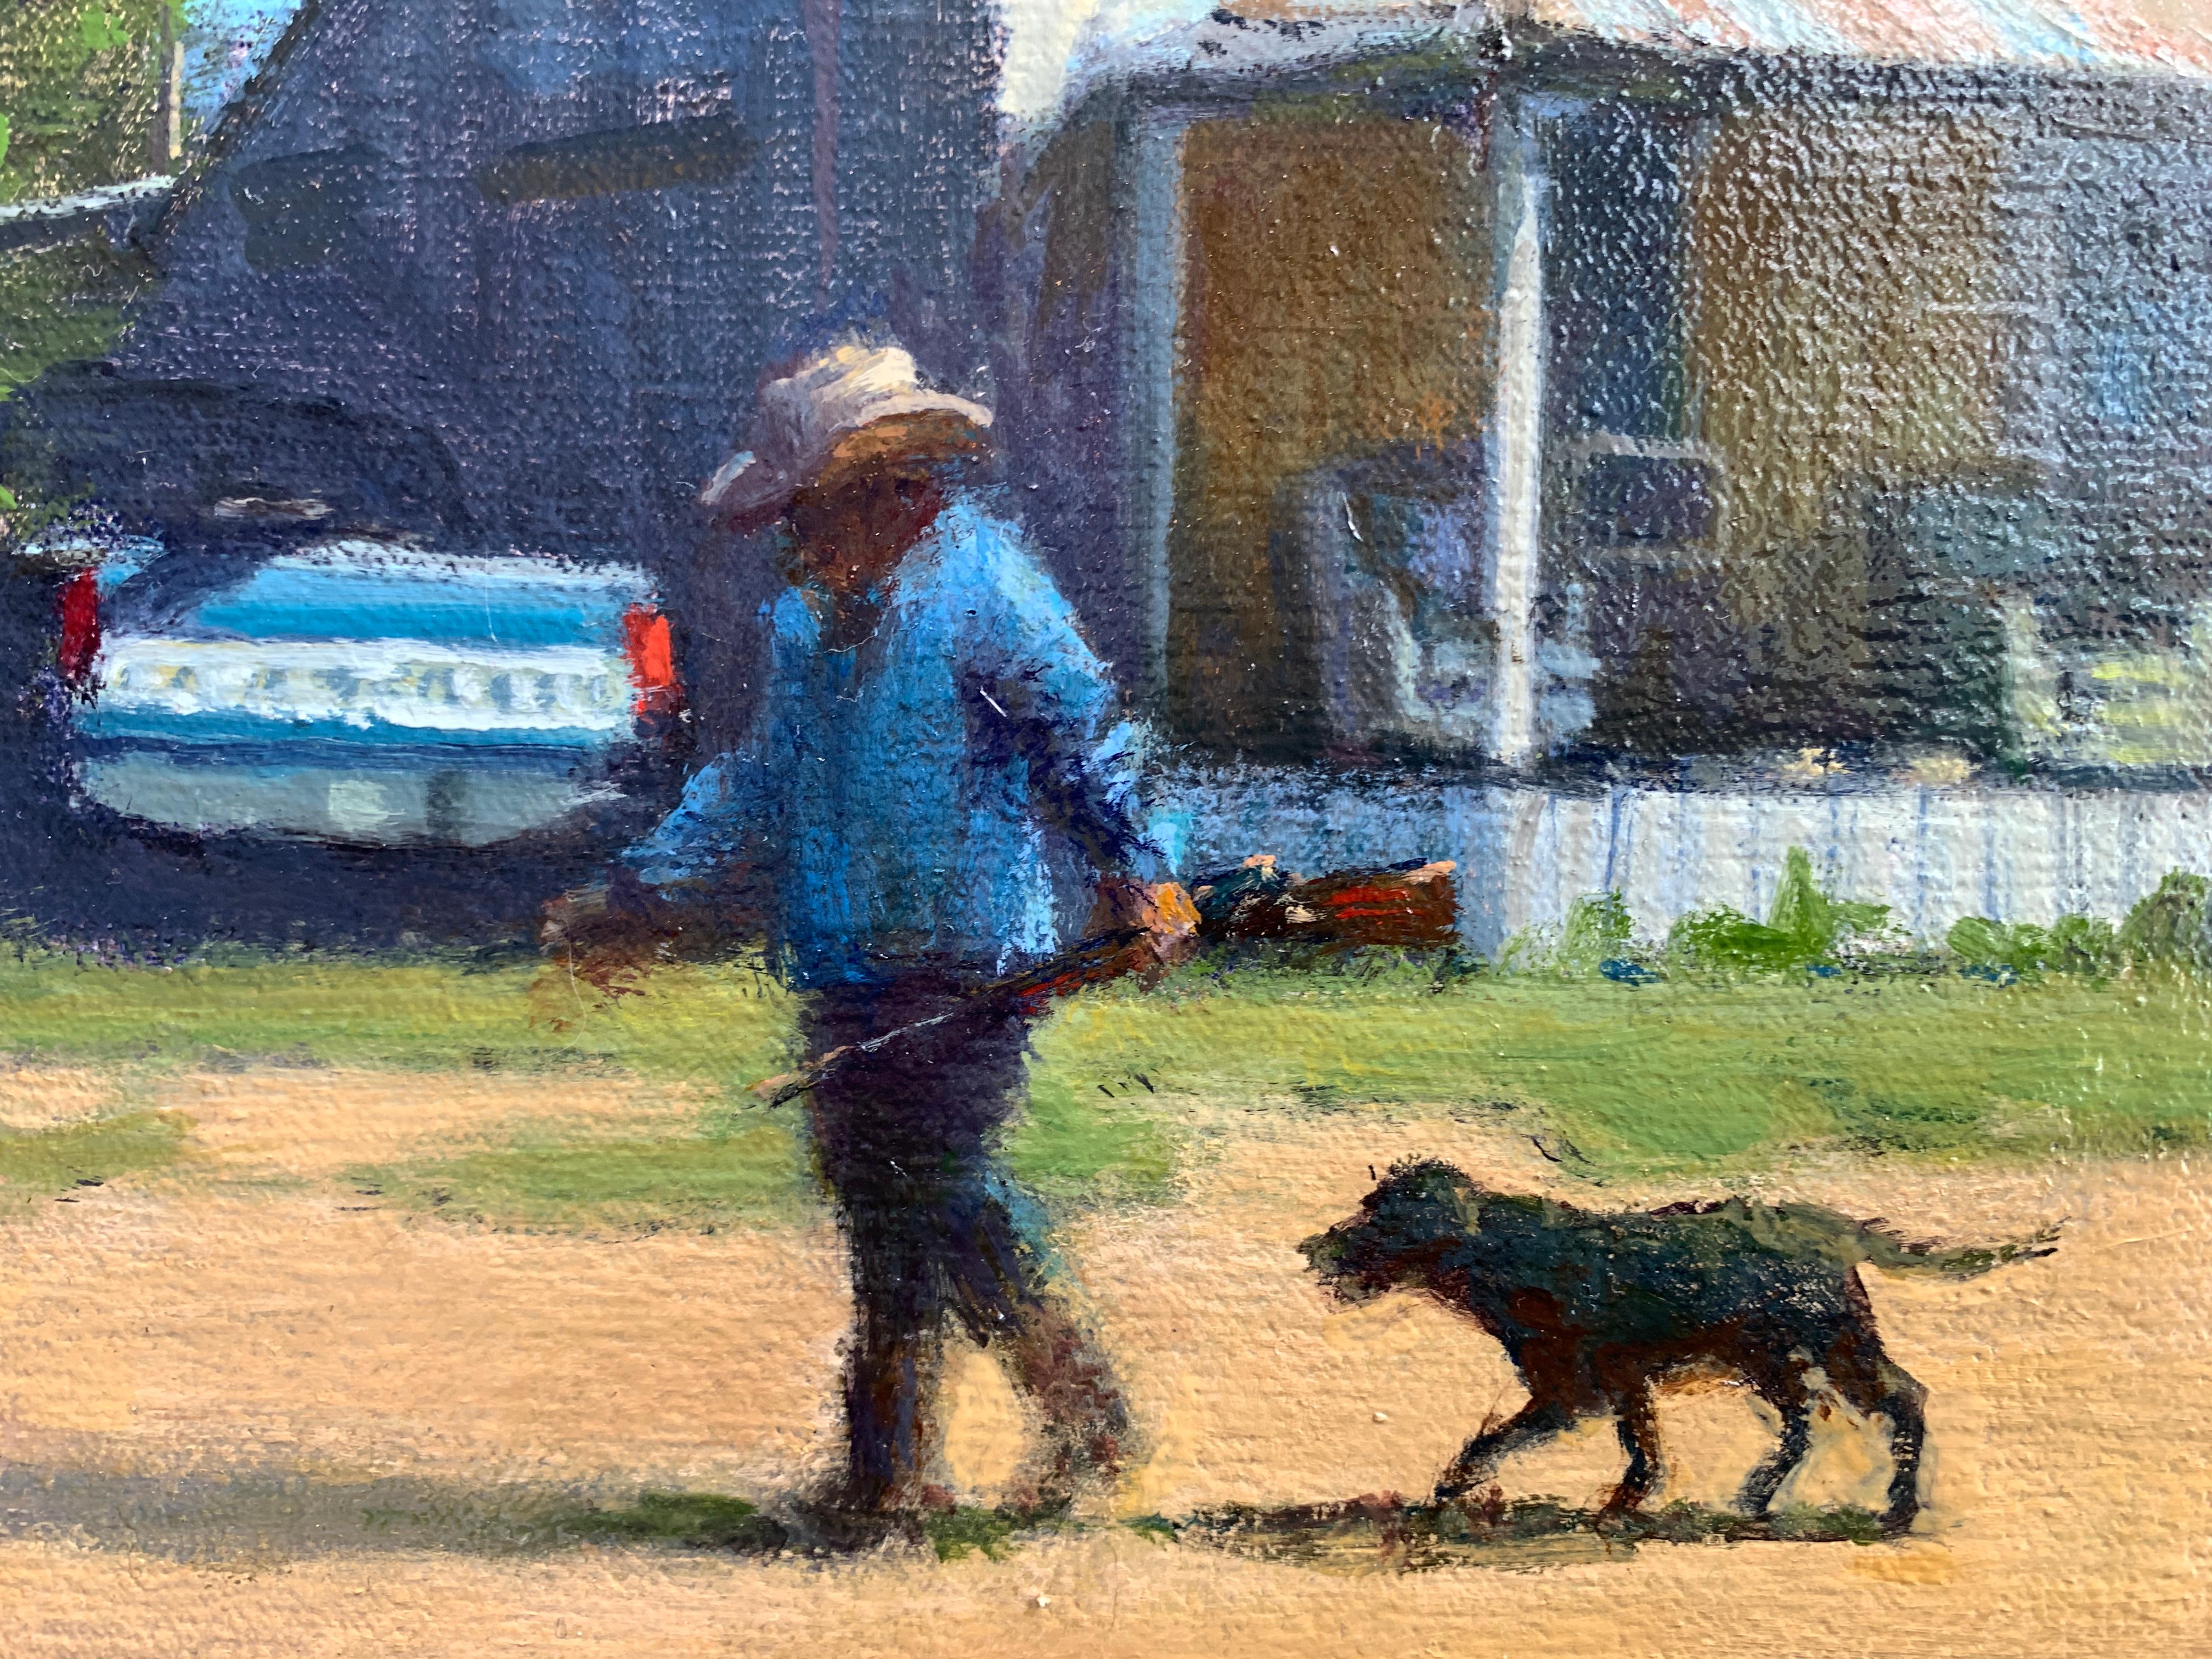 An oil painting of a rural property on a sunny day in the United States. A man wears a cowboy hat, a denim shirt, and boots, while holding a shotgun. He's walking with determination to the left of the scene, with a medium sized black dog following